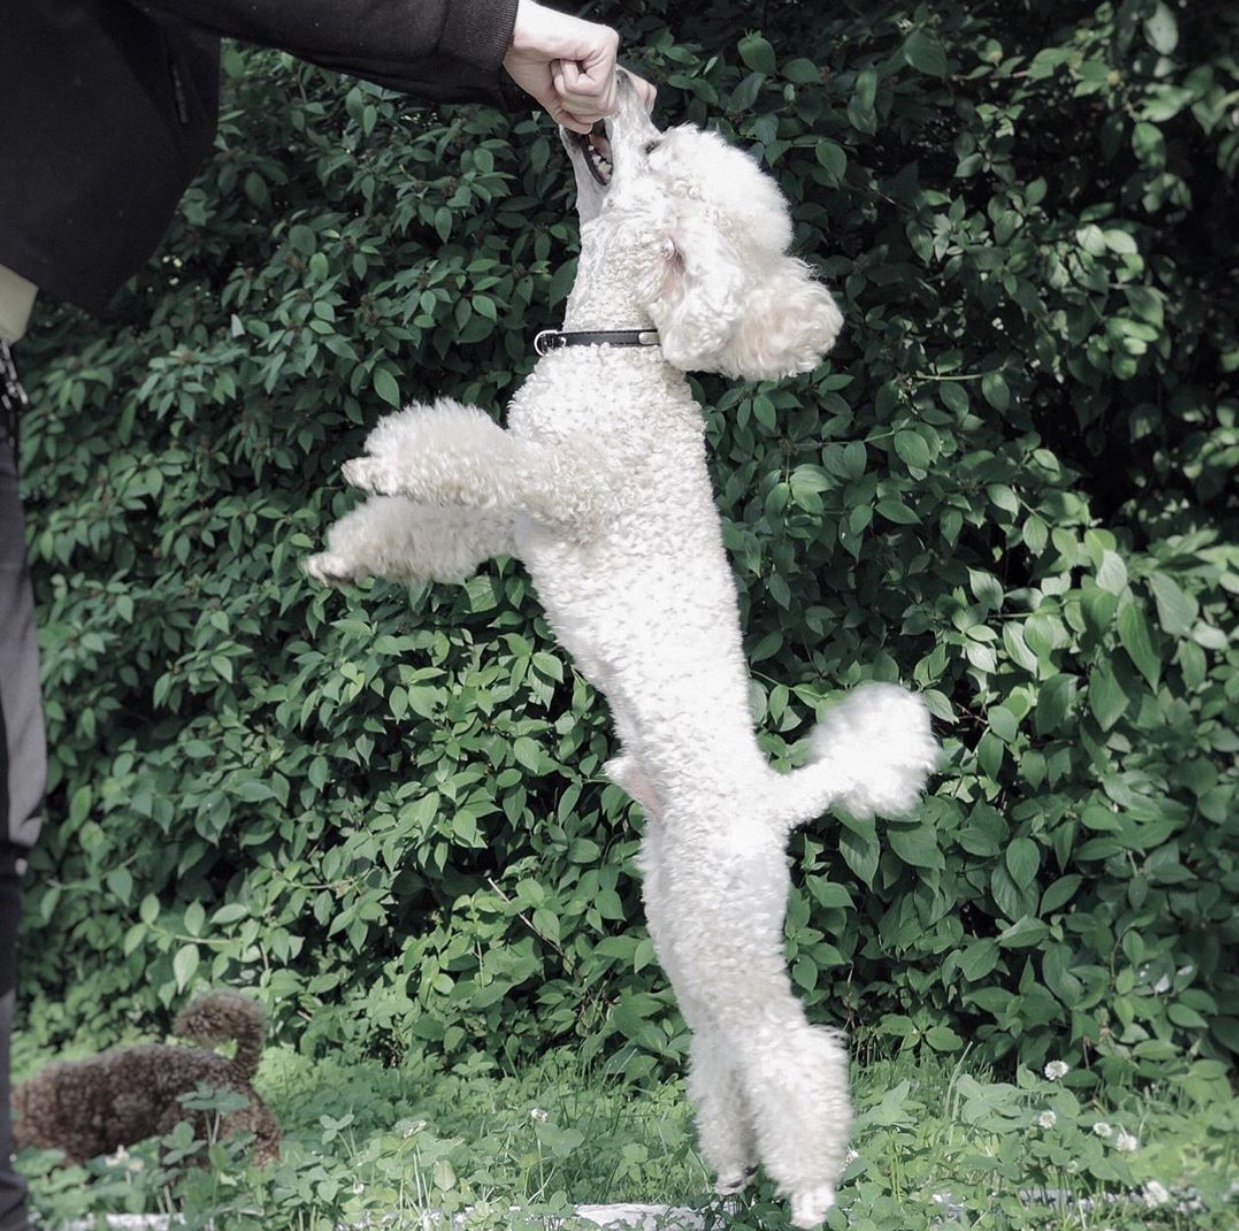 A white Poodle standing up eating treats from the hand of a person standing in from of him